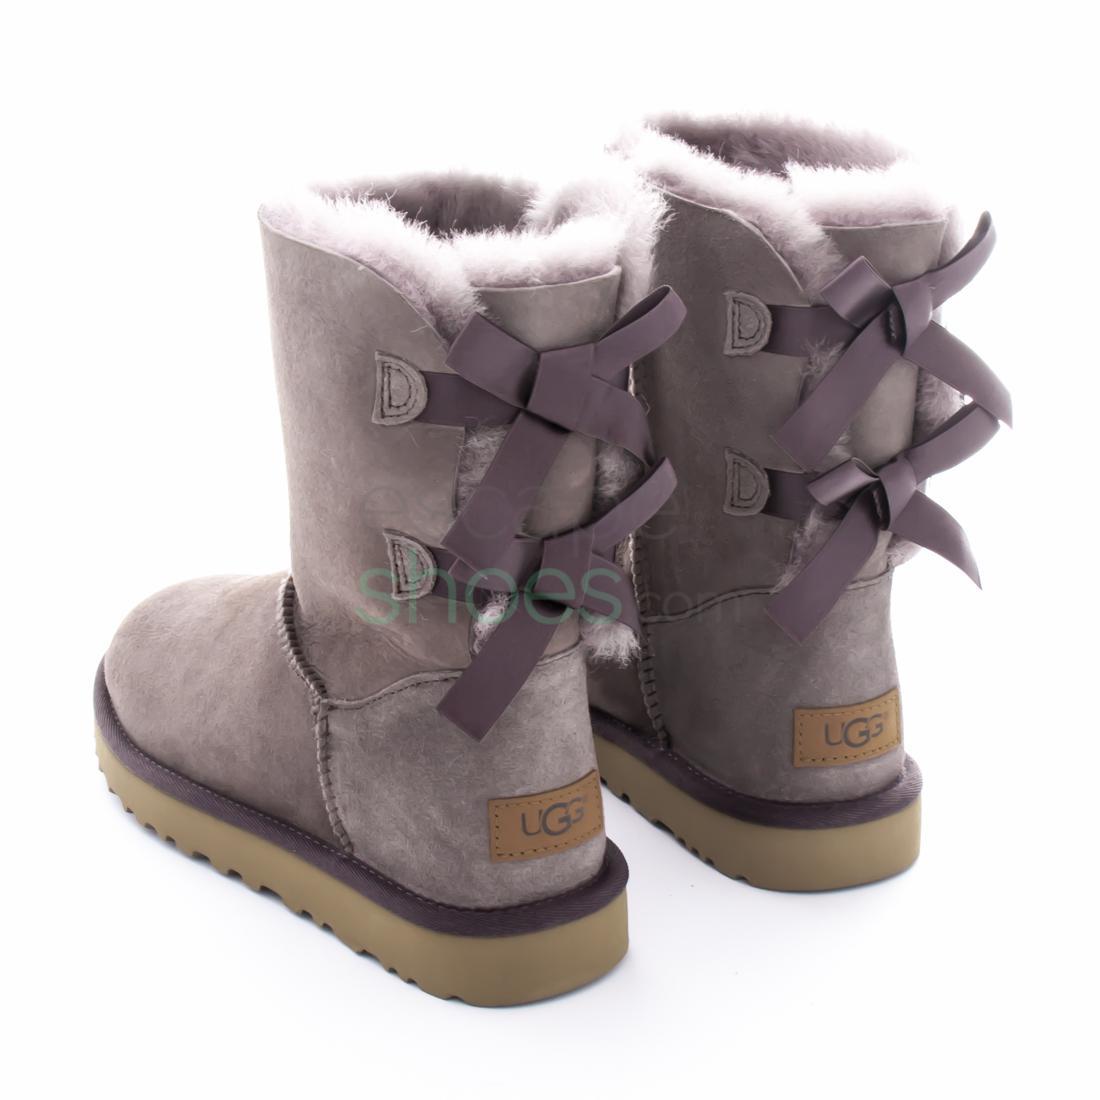 Boots UGG Australia Bailey Bow Stormy 